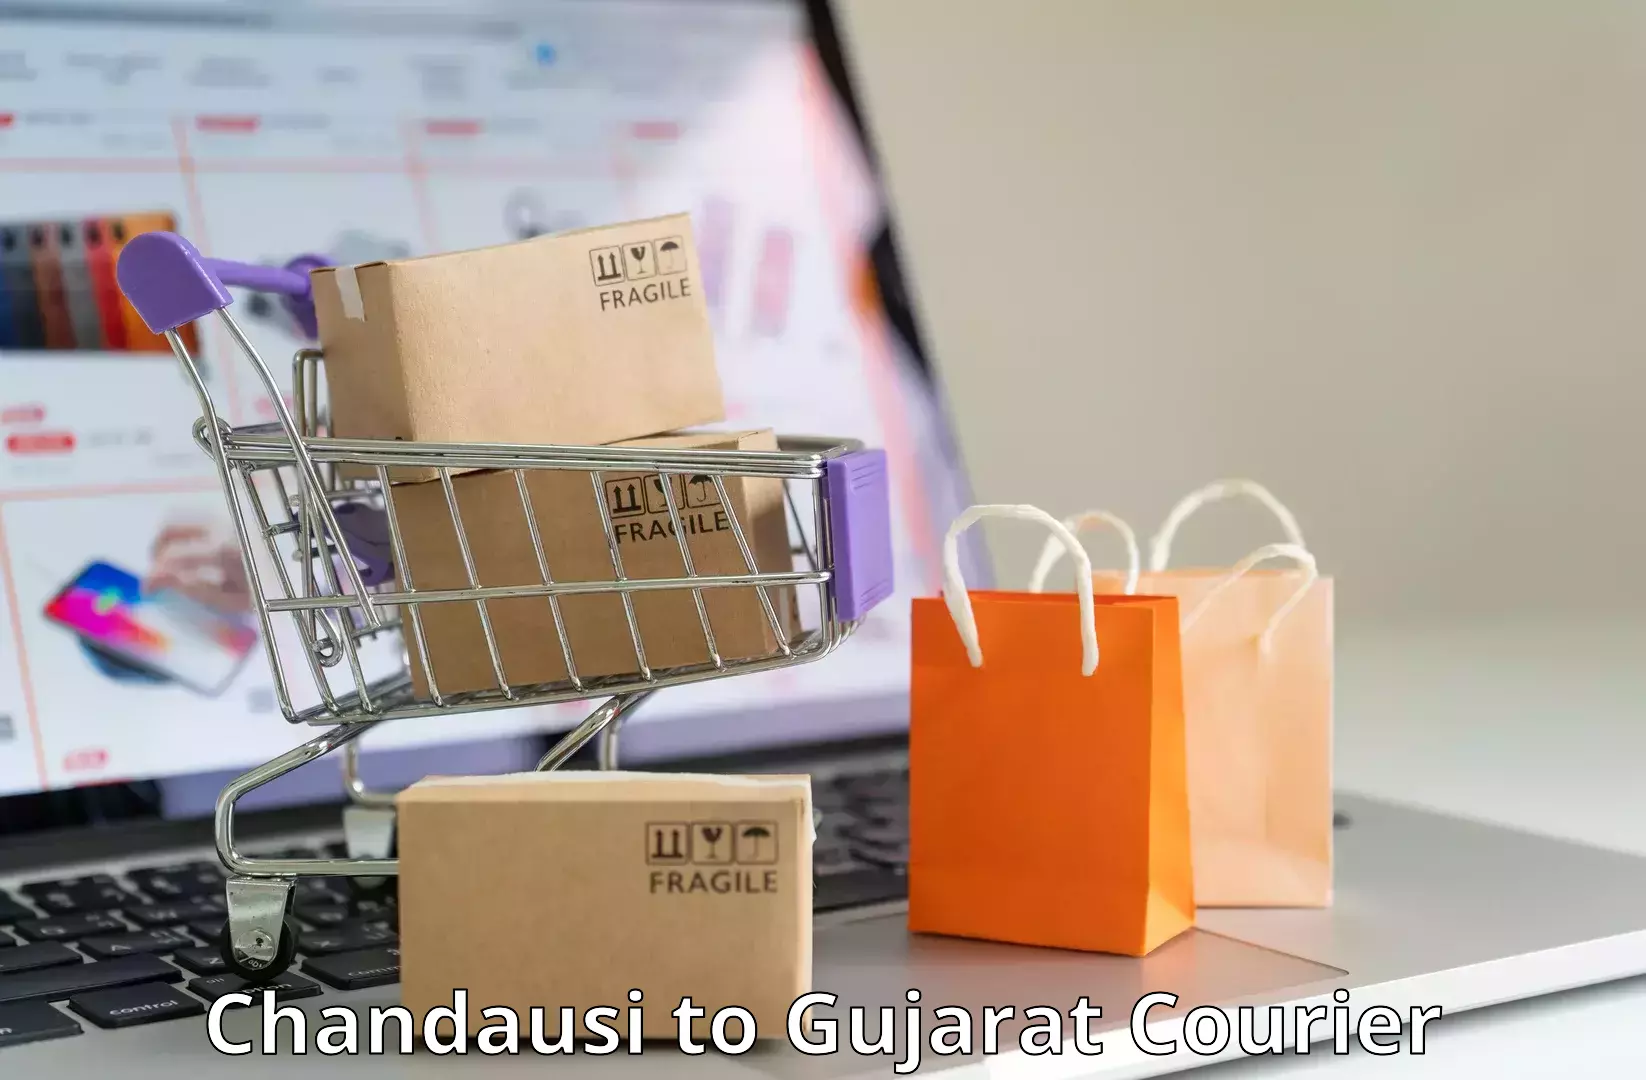 Residential courier service Chandausi to Gujarat